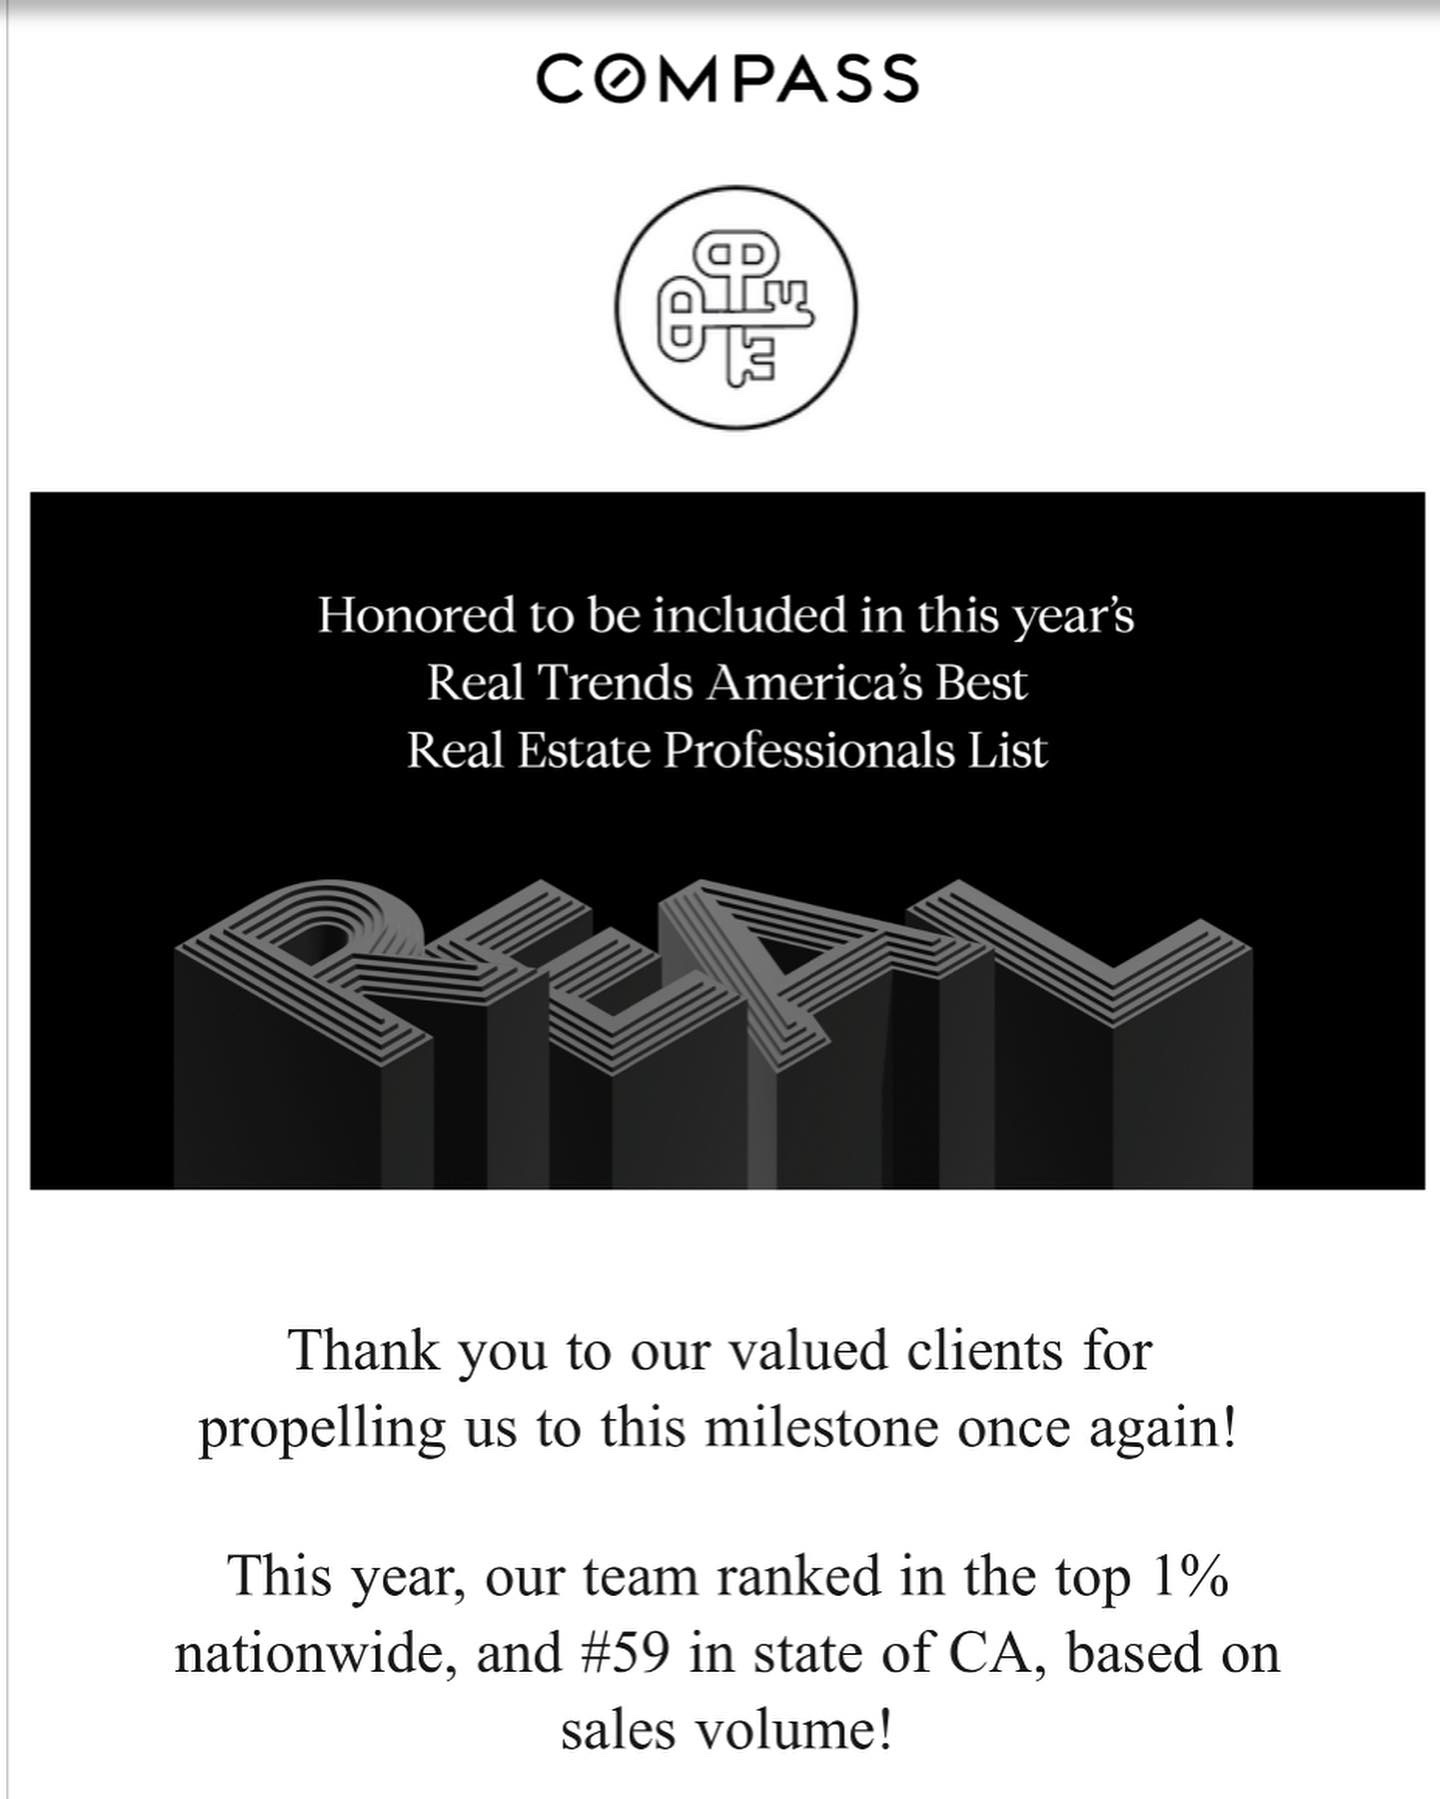 A text banner boasting our teams top sales volume ranking in California